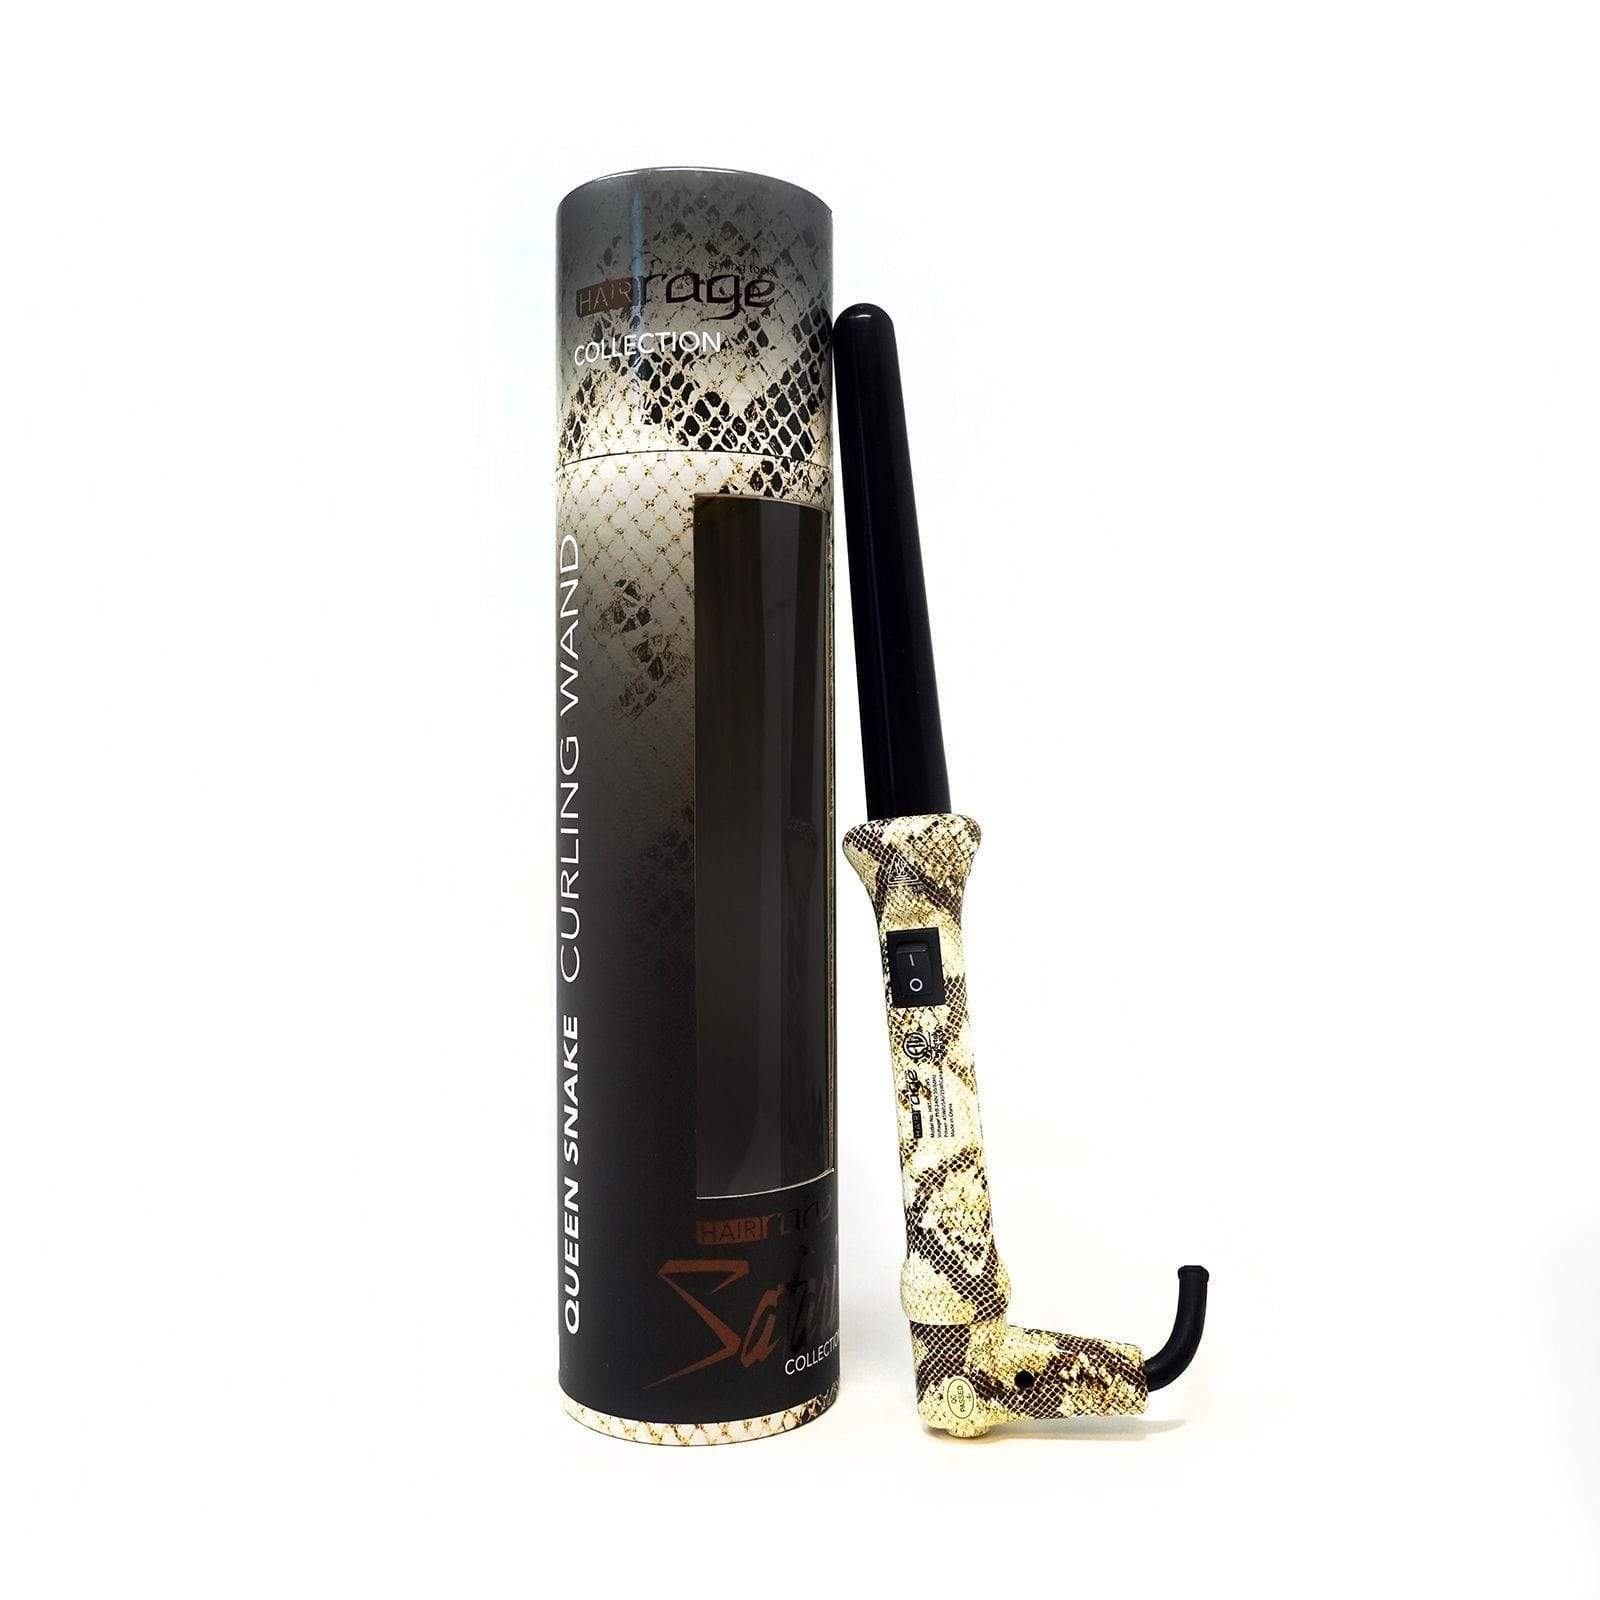 Hair Rage White Snake 1&quot; Curling Wand | Ceramic | Animal Print Collection